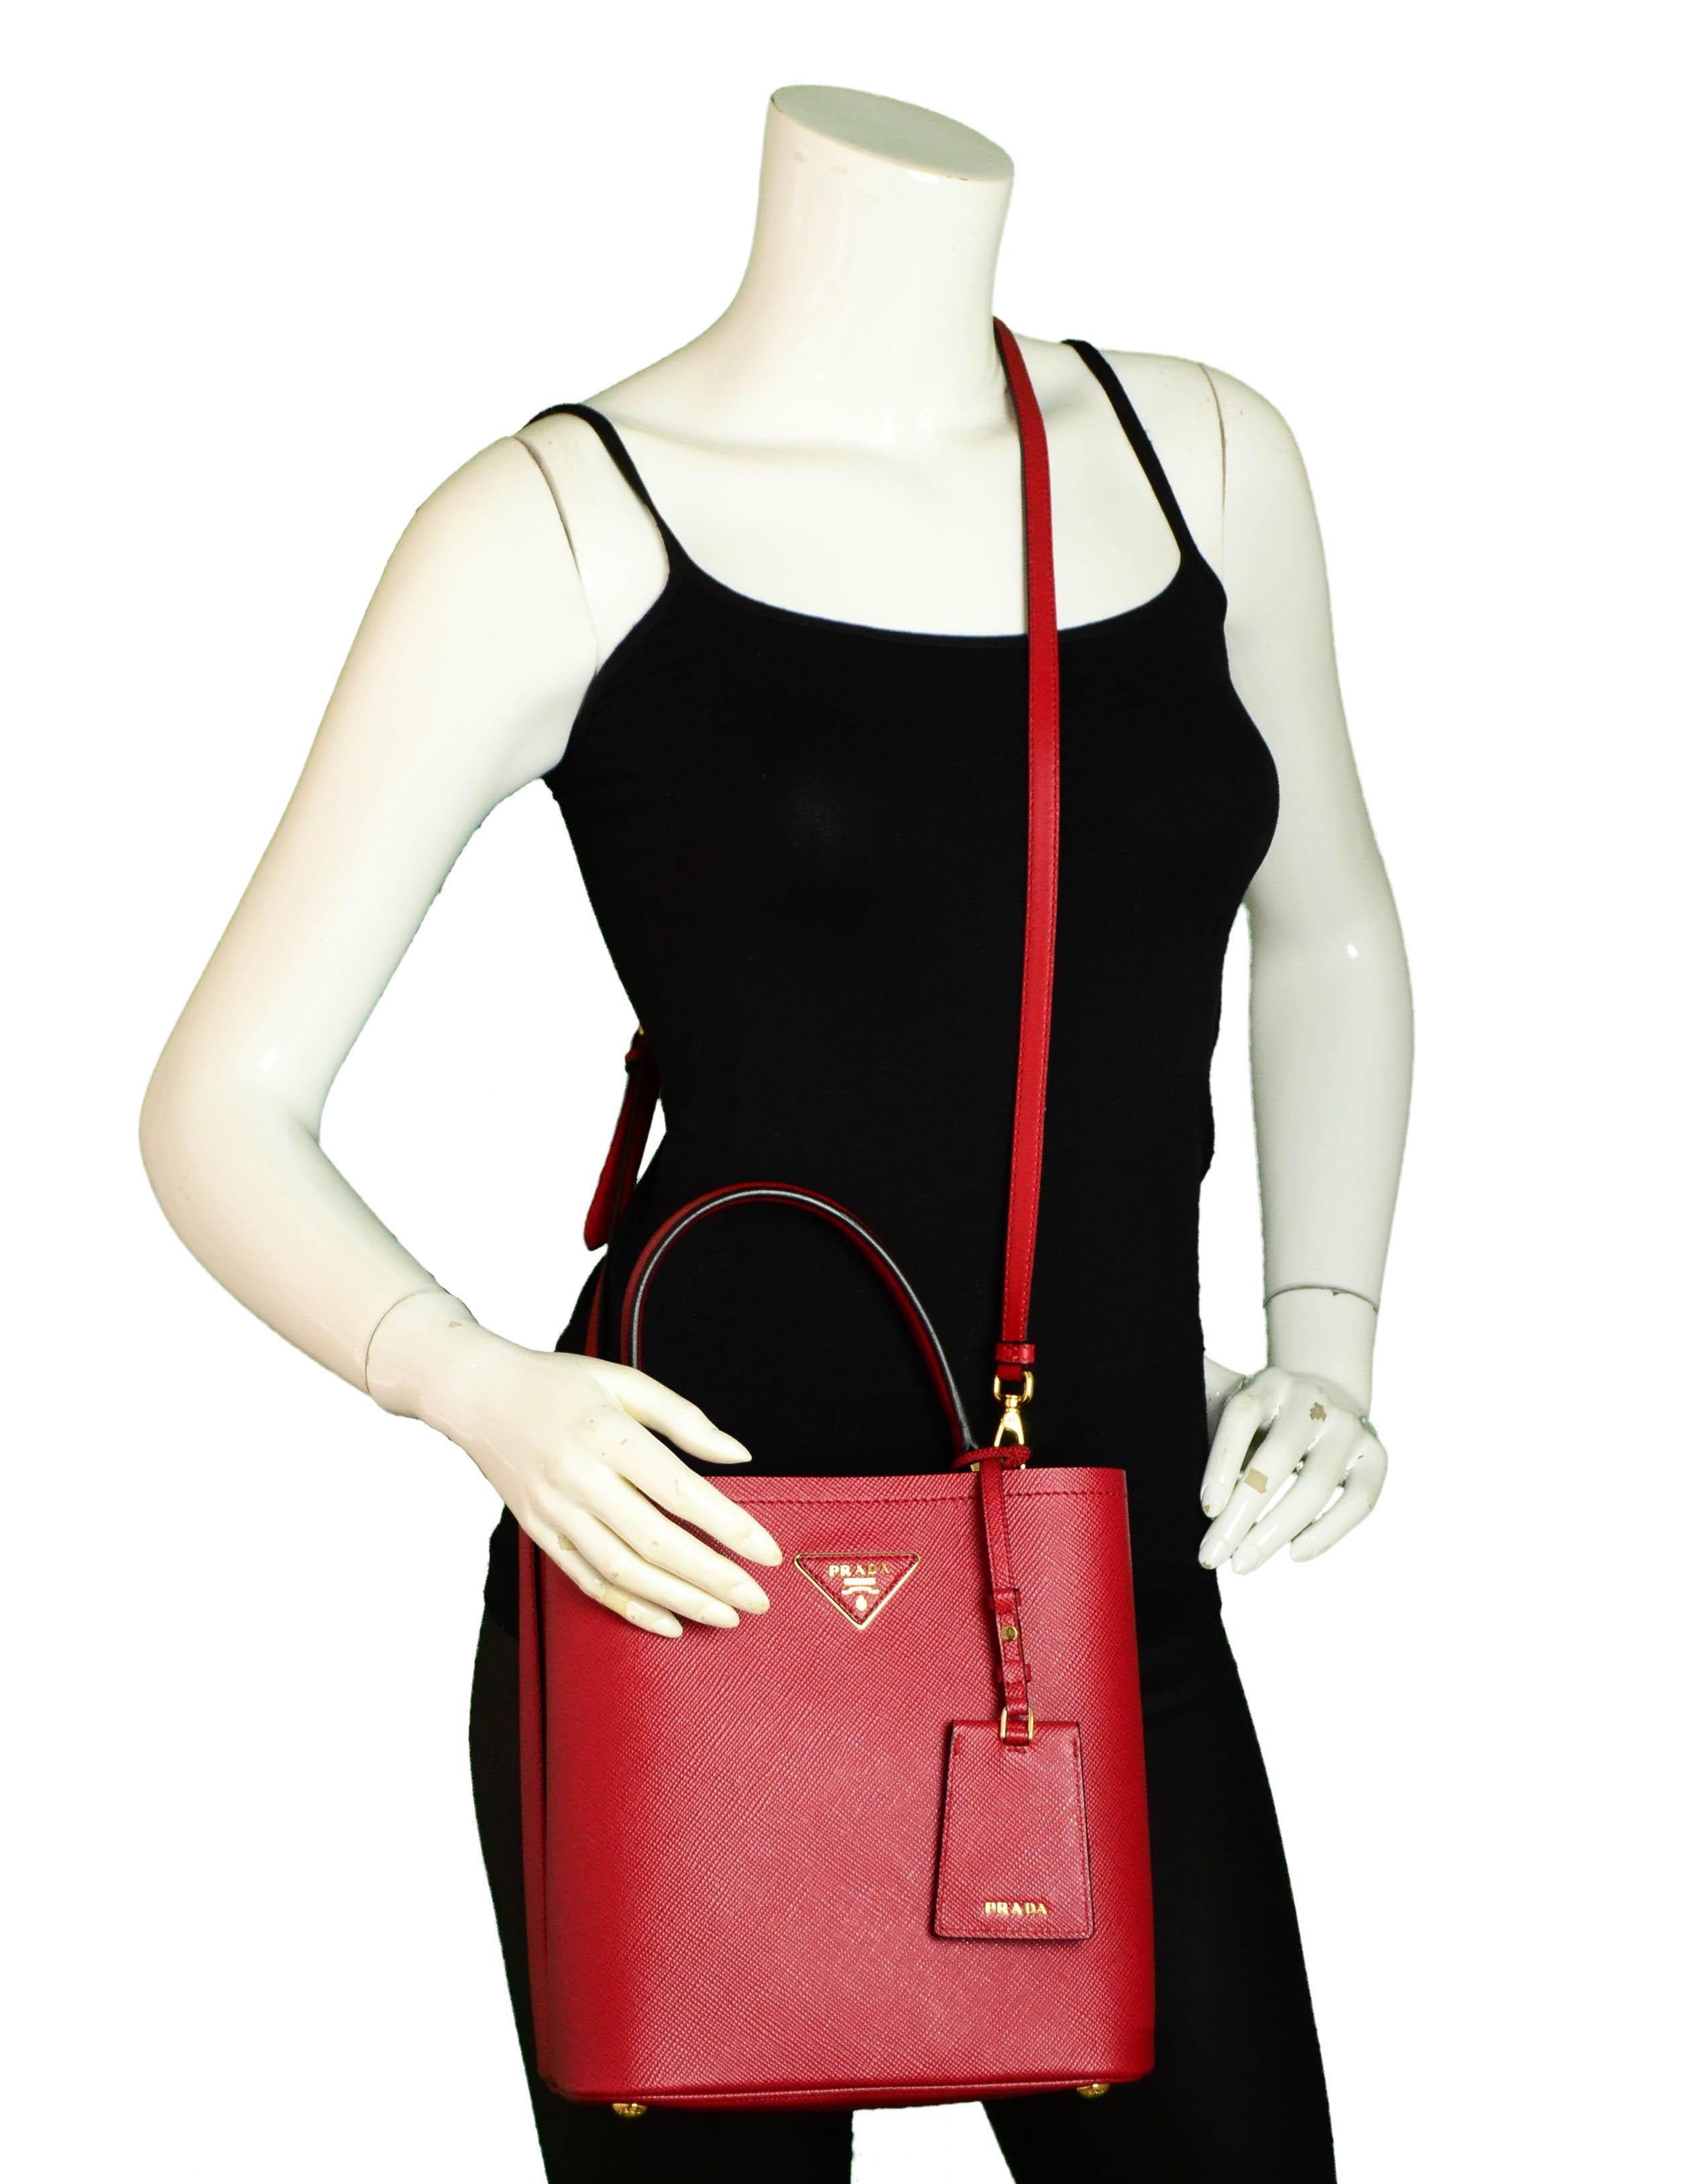 Prada 1BA212 Fuoco Red/Nero Black Medium Saffiano Leather Panier Bag

Made In: Italy
Color: Fucco red/nero
Hardware: Goldtone
Materials: Saffiano leather
Lining: Leather
Closure/Opening: Magnetic snap
Interior Pockets: Middle slit divides bag into